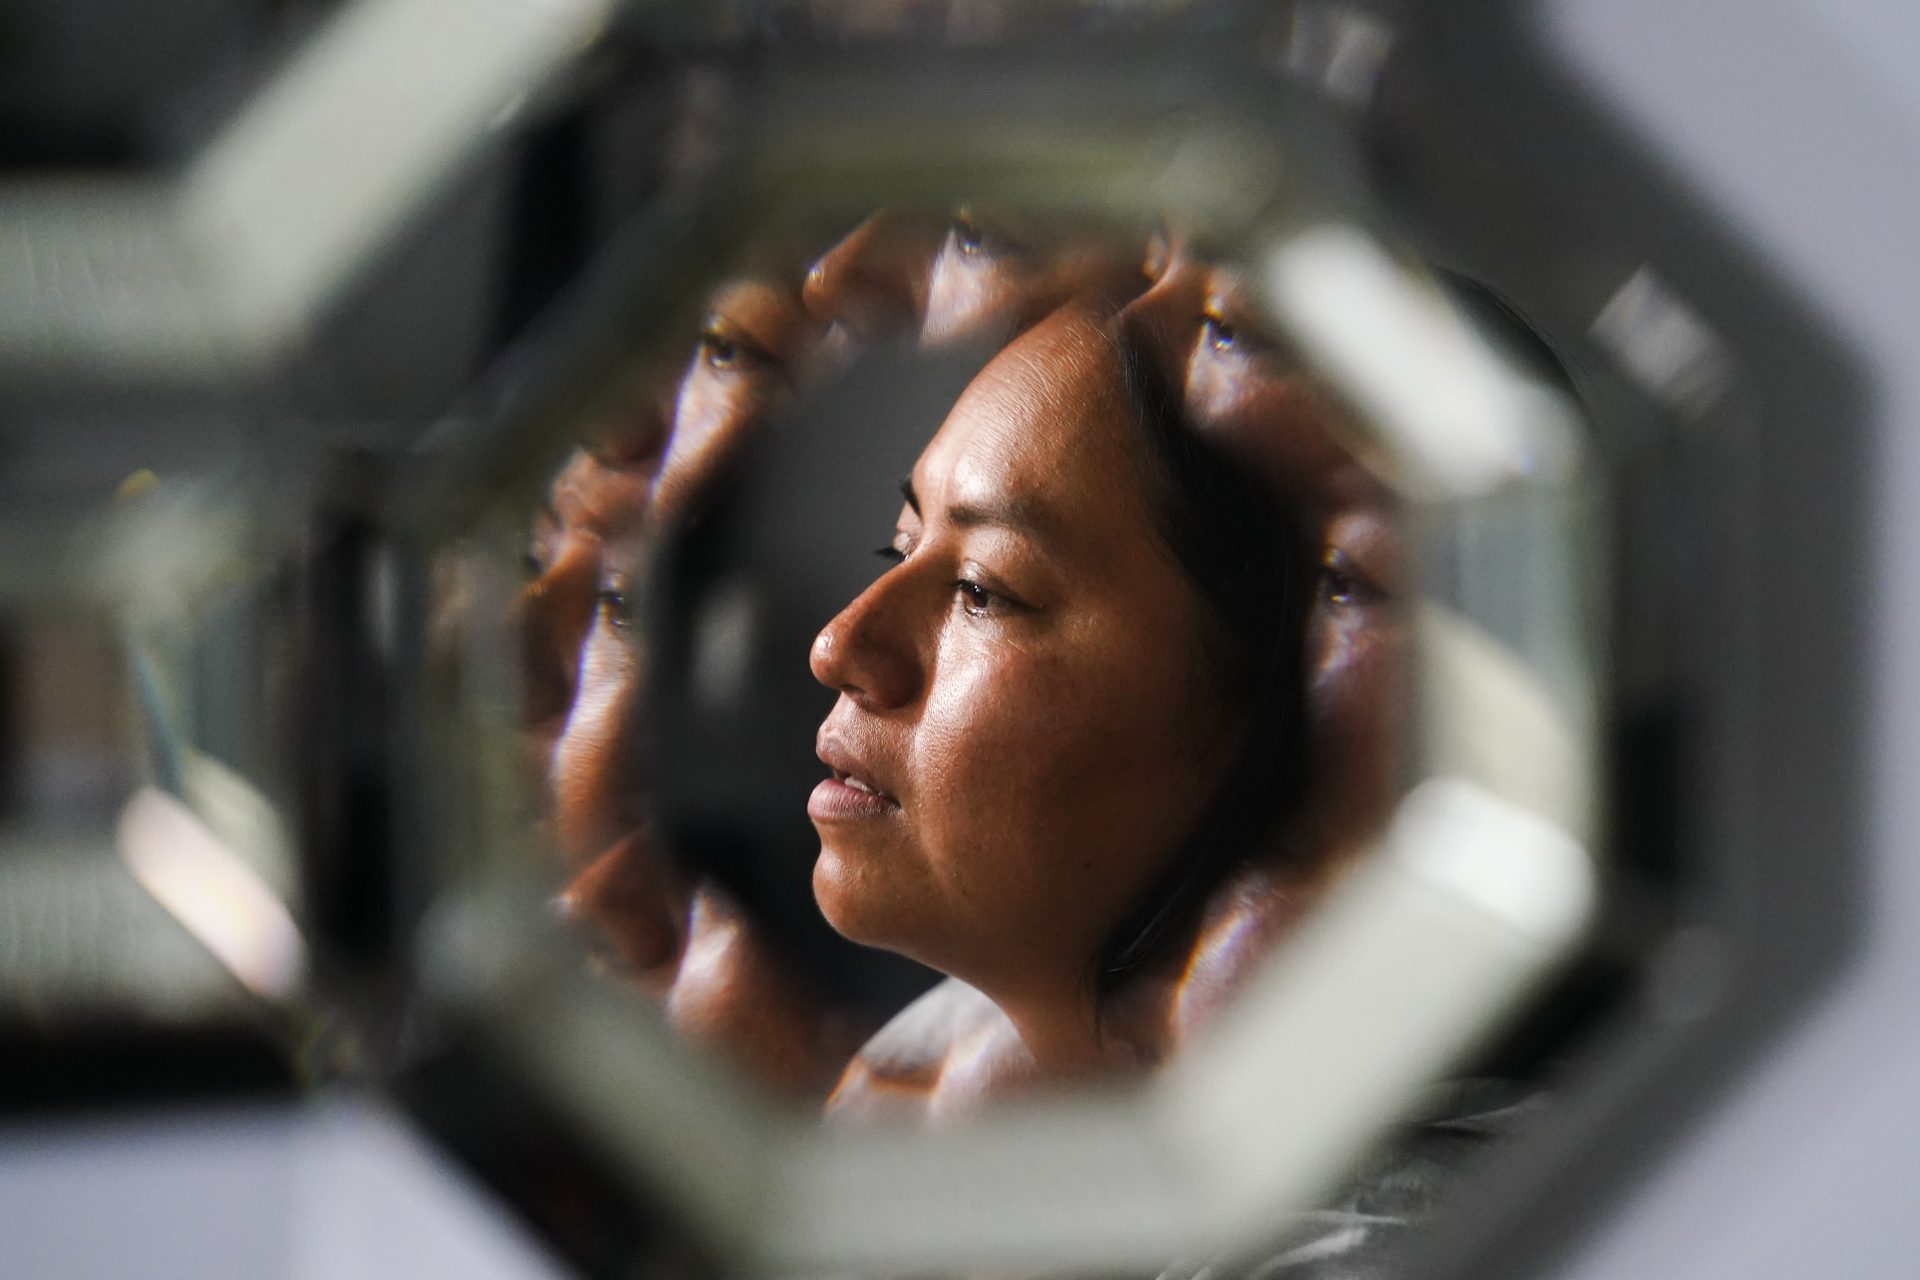 Lucia Altamirano, reflected in a mirror, speaks during an interview with The Associated Press in Philadelphia, Wednesday, Oct. 6, 2021. Philadelphia parents who don’t speak English say they’ve long been excluded from parts of their children’s education because of language barriers, an issue that's been exacerbated by the pandemic and the return to in-person learning.